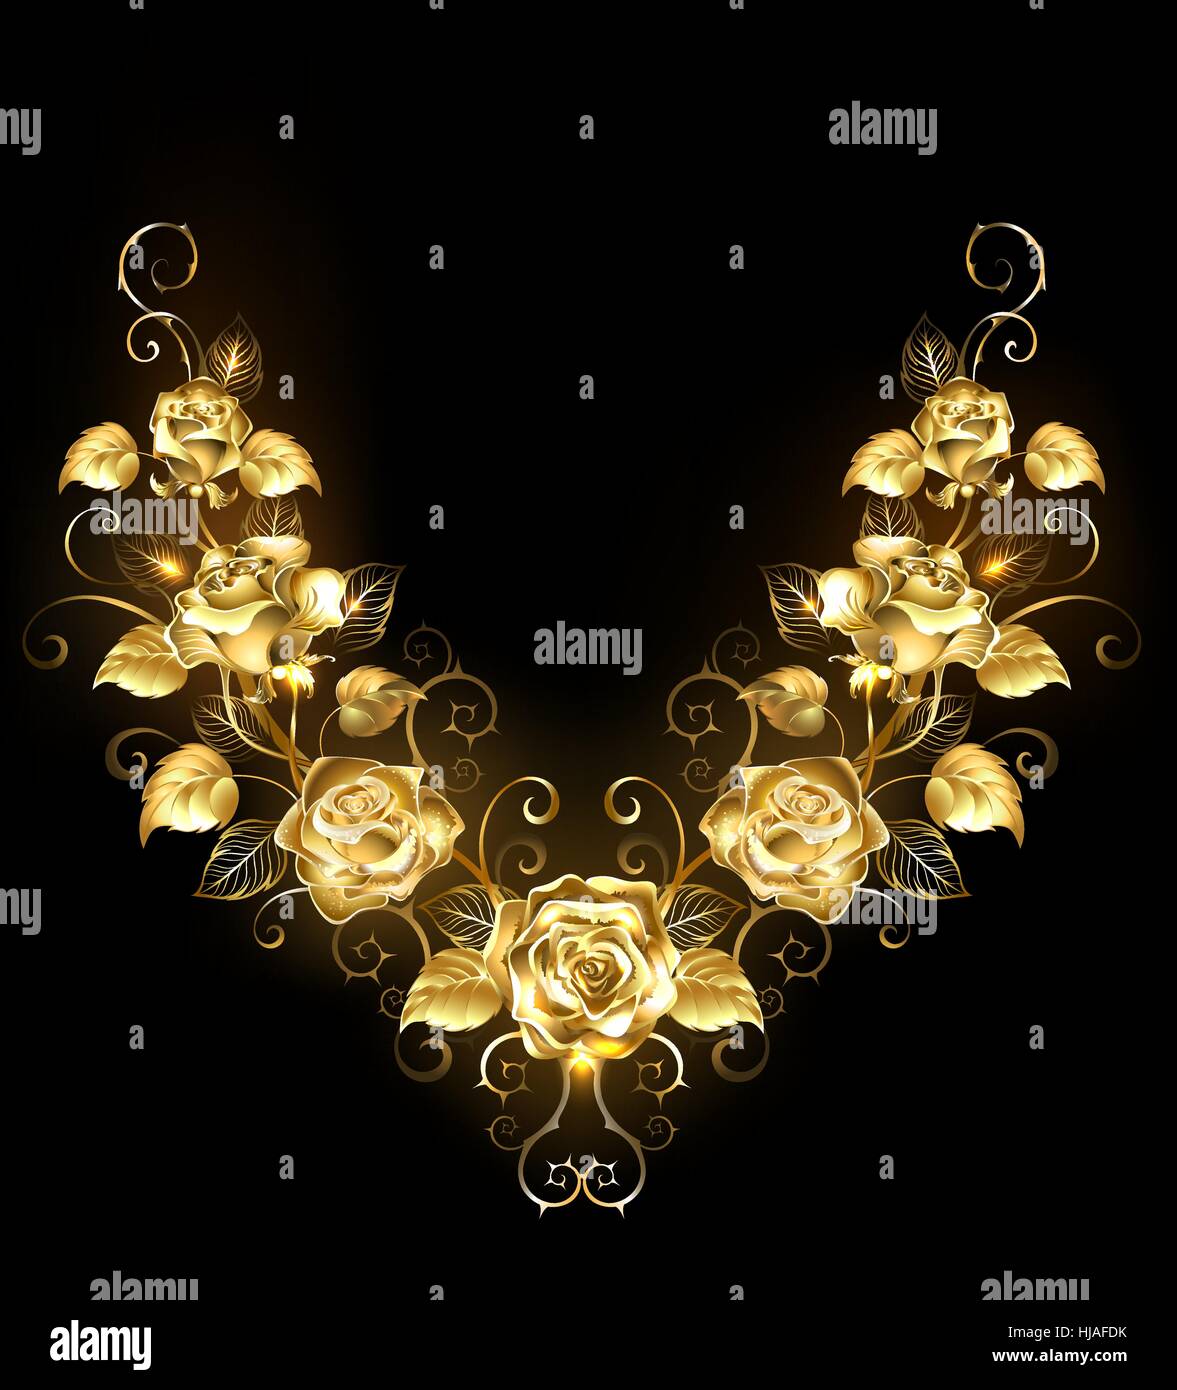 Symmetrical pattern of shiny, gold, twisted roses on a black background. Golden Rose. Stock Vector